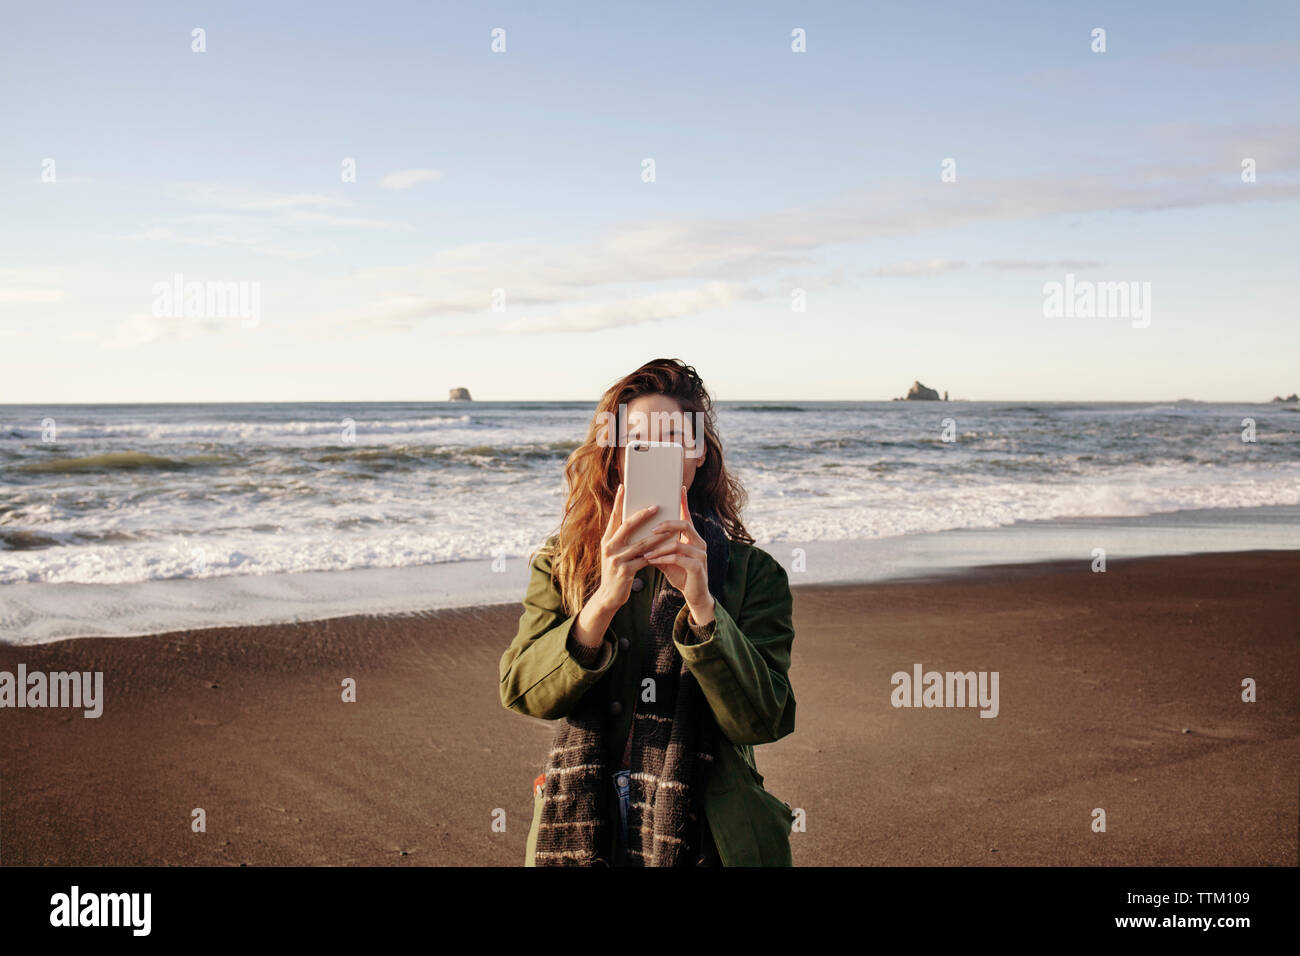 Young woman photographing through smart phone on beach Stock Photo